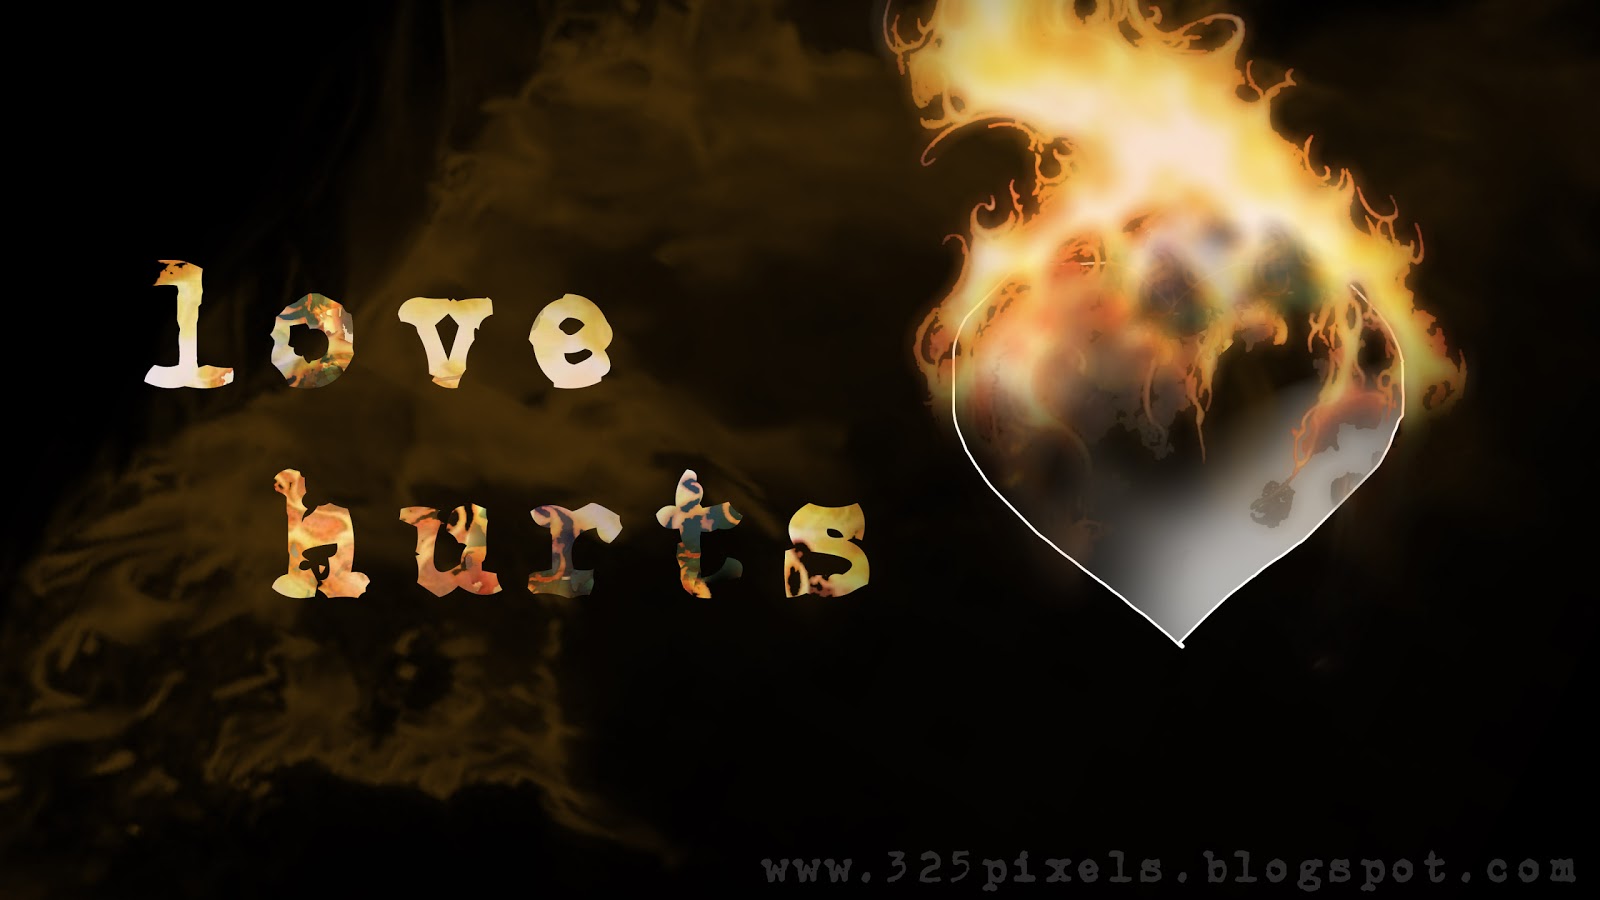 Love Wallpaper Hurts How To Put Image